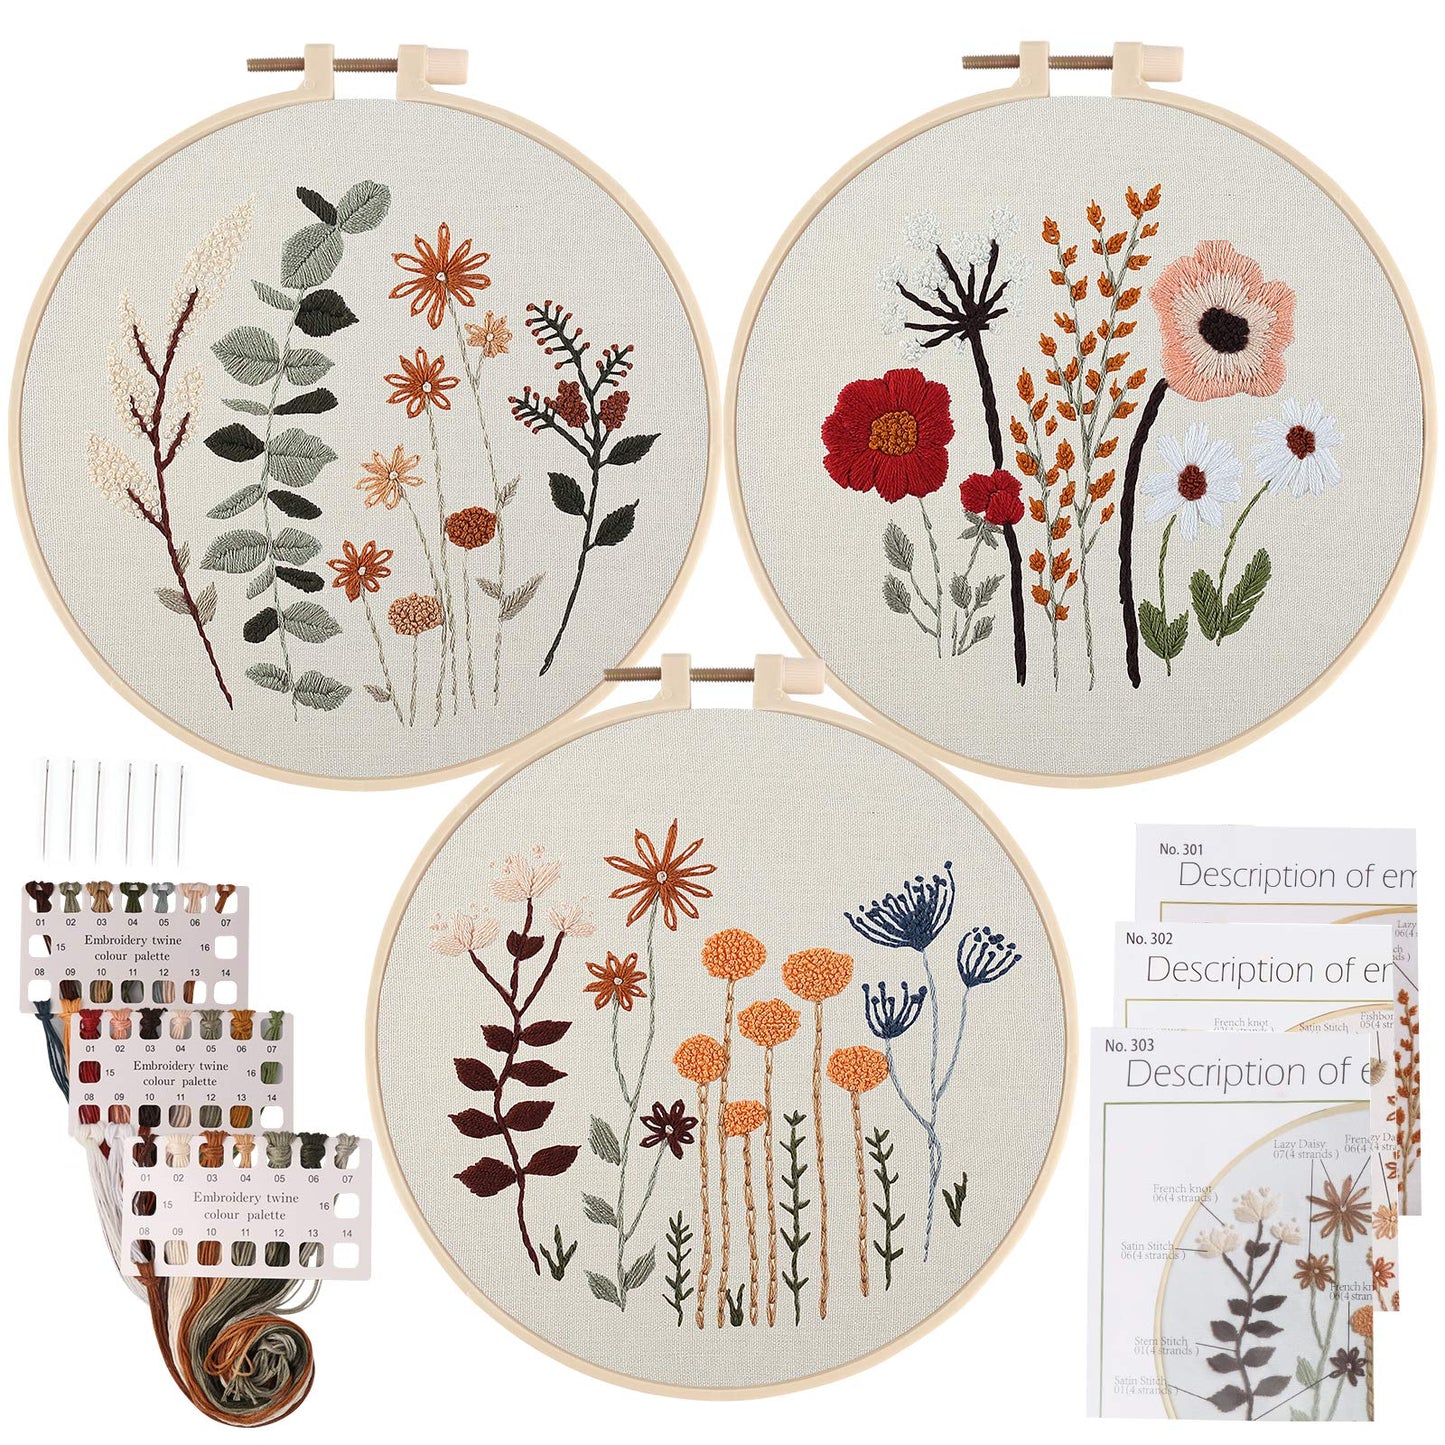 Uphome 3 Pack Embroidery Starter Kit for Beginners Stamped Cross Stitch Kits with Cute Flowers and Plants Patterns with 1 Embroidery Hoop and Color